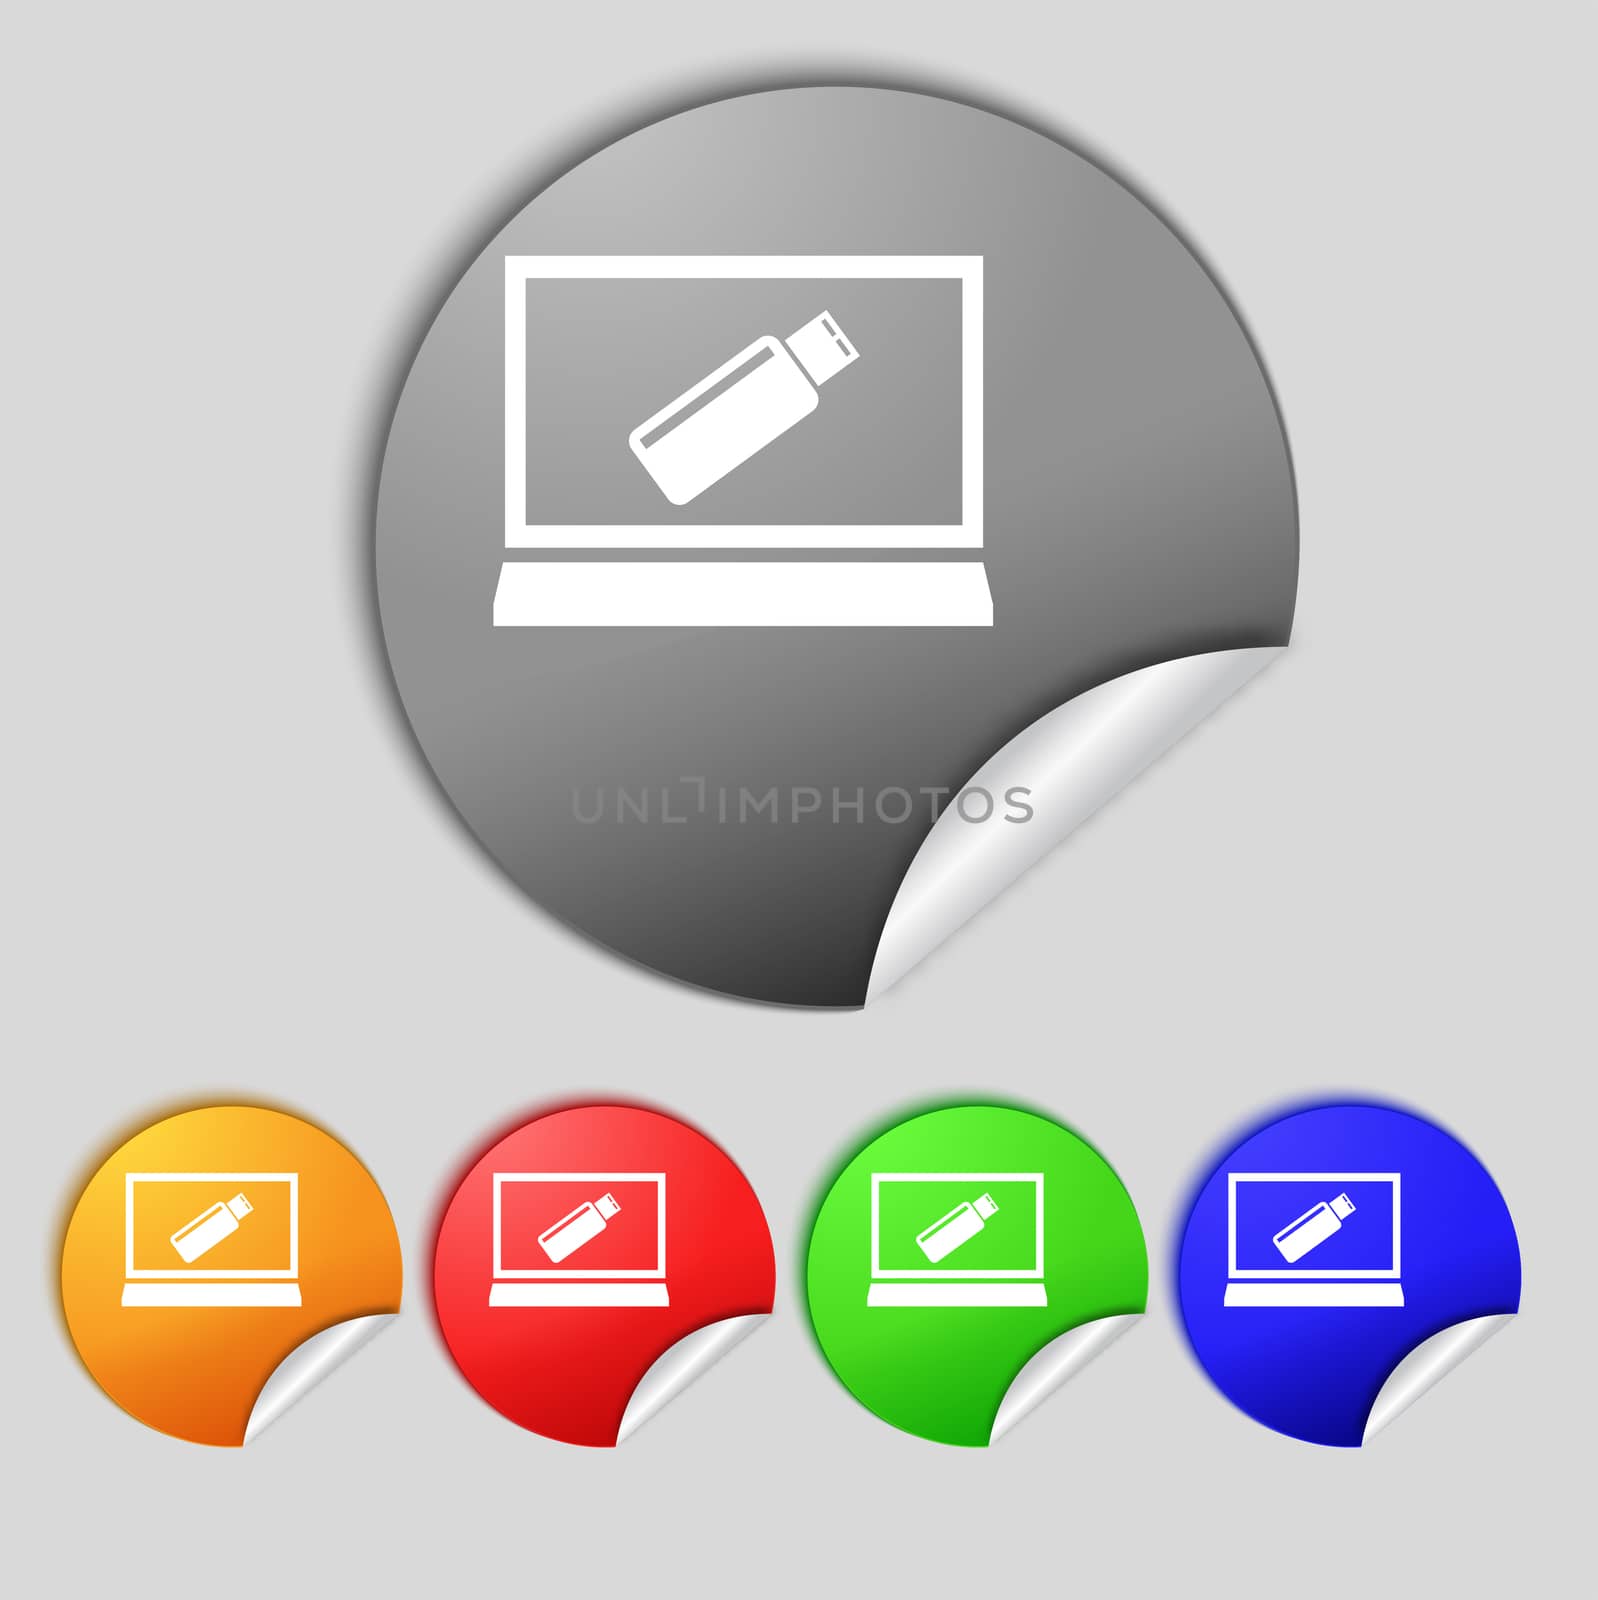 usb flash drive and monitor sign icon. Video game symbol. Set colourful buttons.  illustration